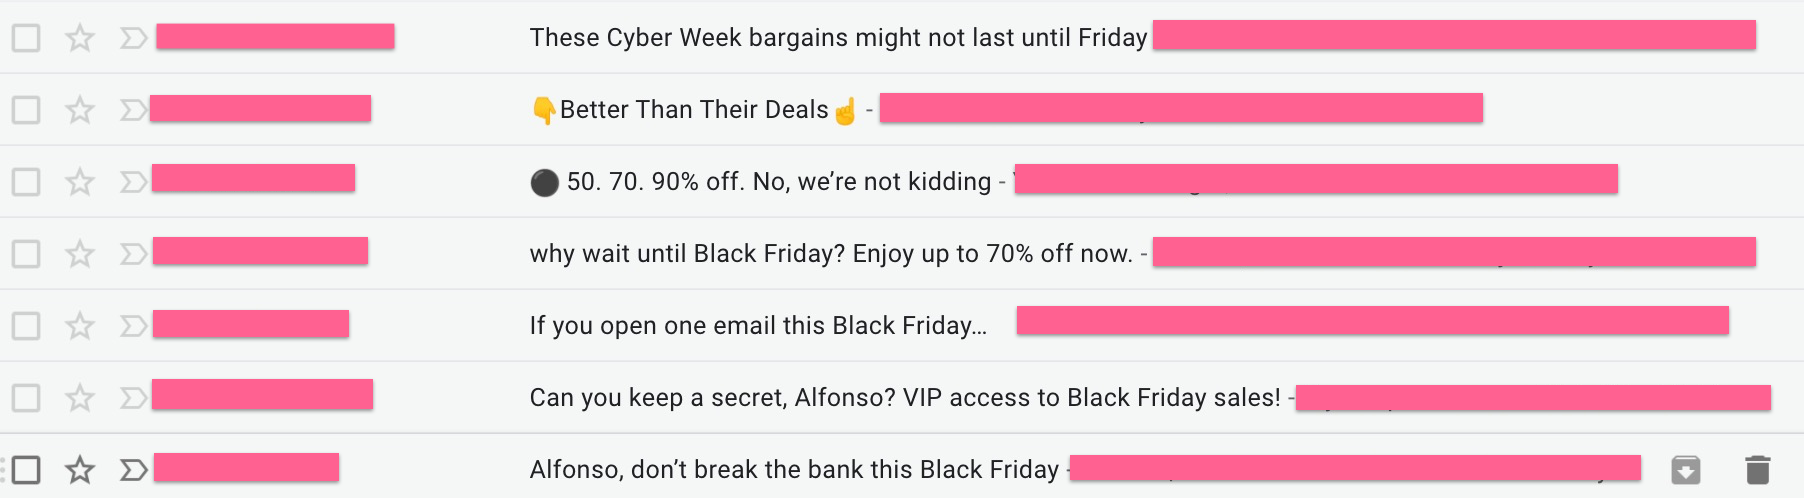 Best black friday subject lines